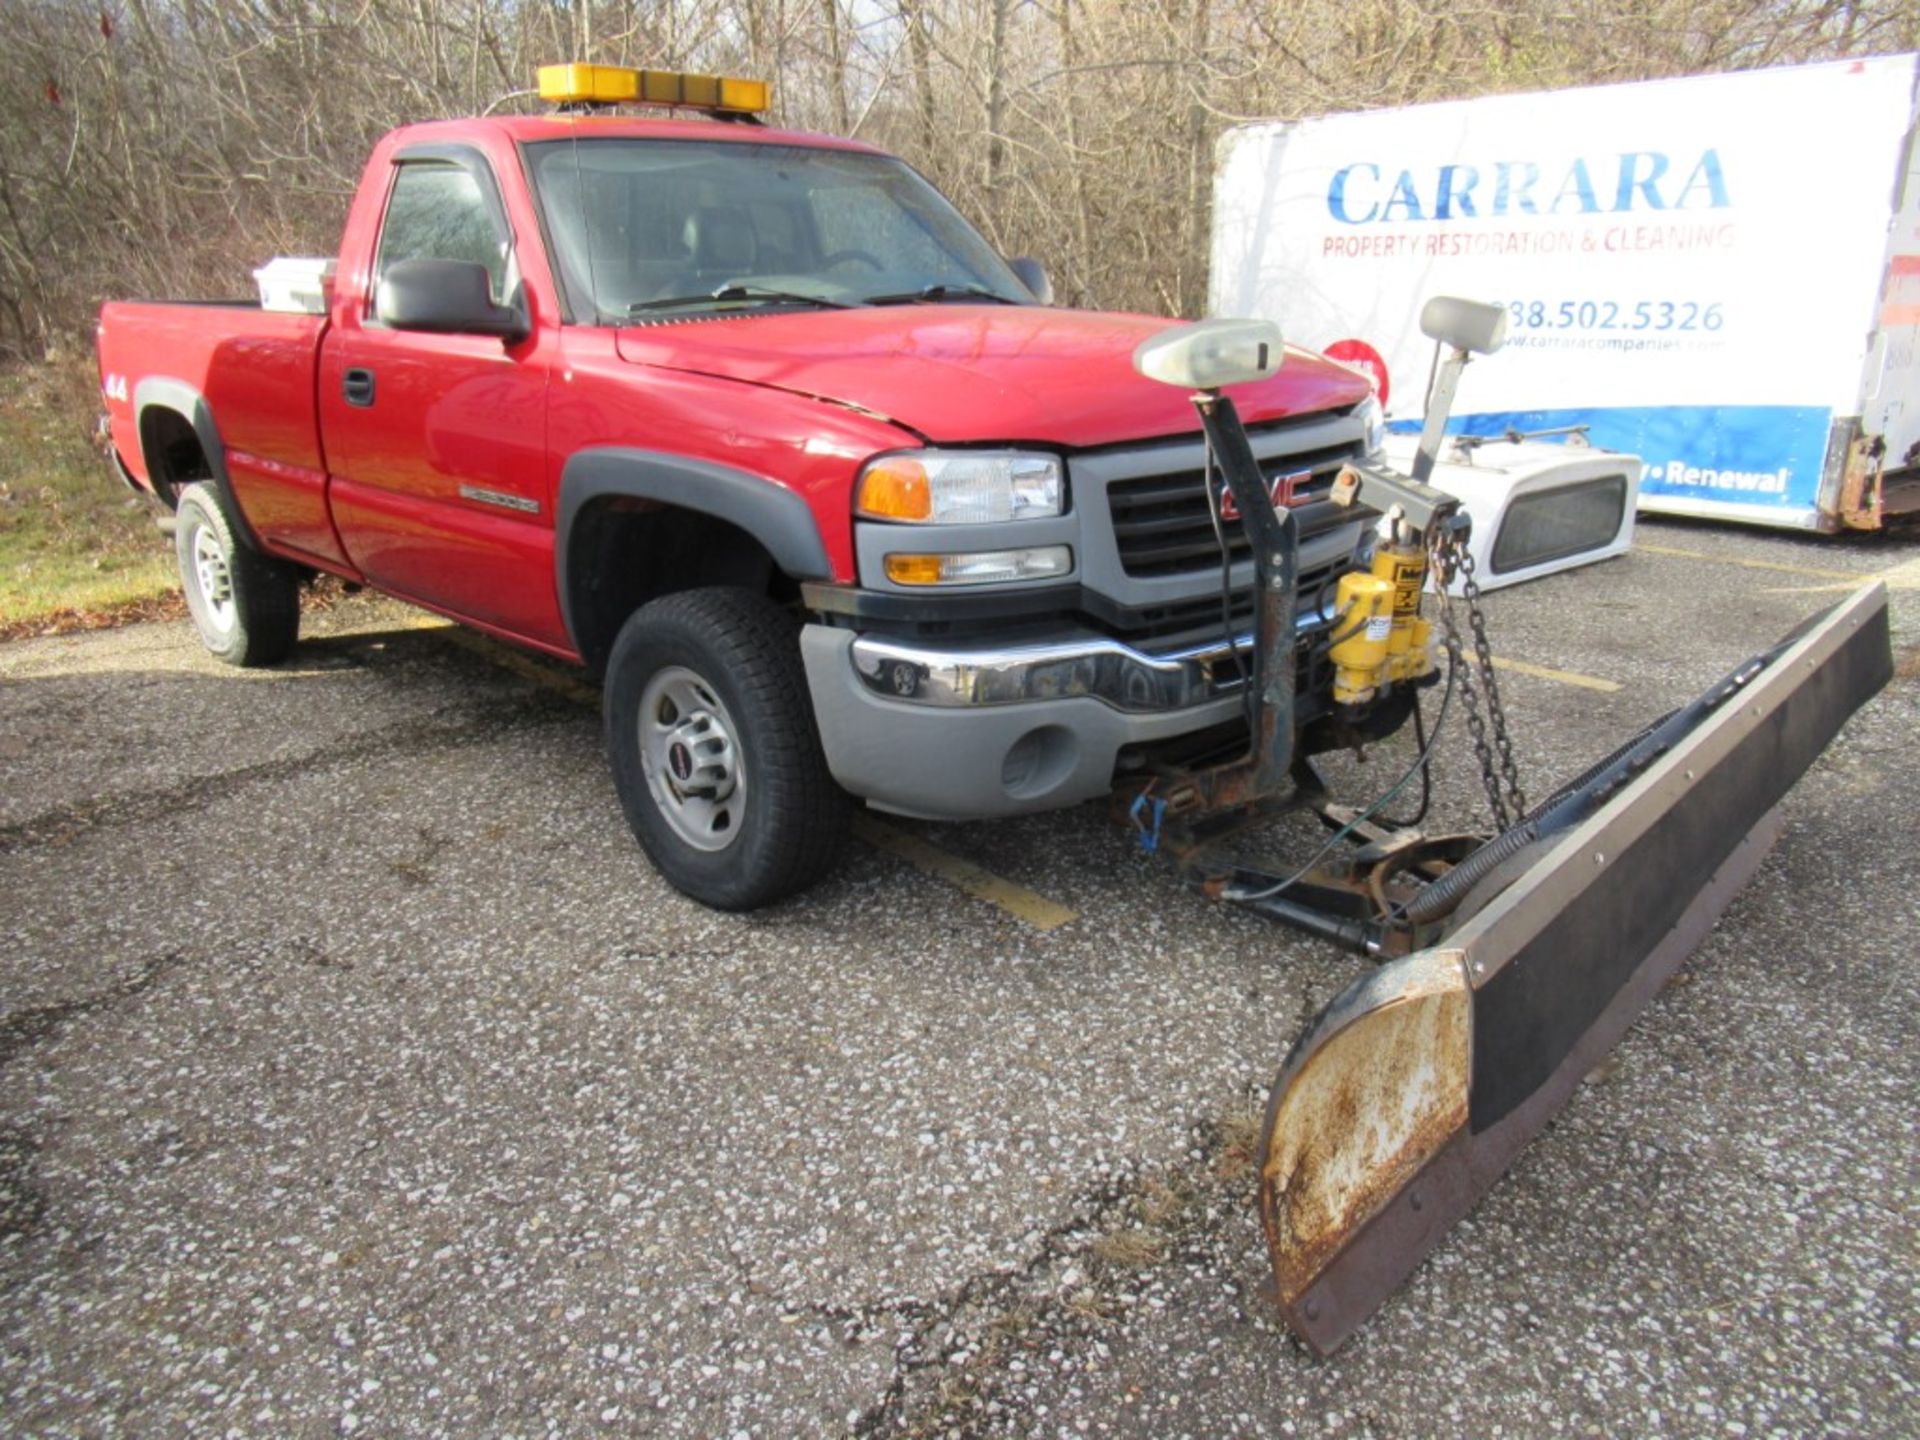 2005 GMC 2500 HD Pickup with Snow Plow, VIN 1GTHK24U05E308334, 4 WD, Automatic, AM/FM, Started - Image 4 of 37